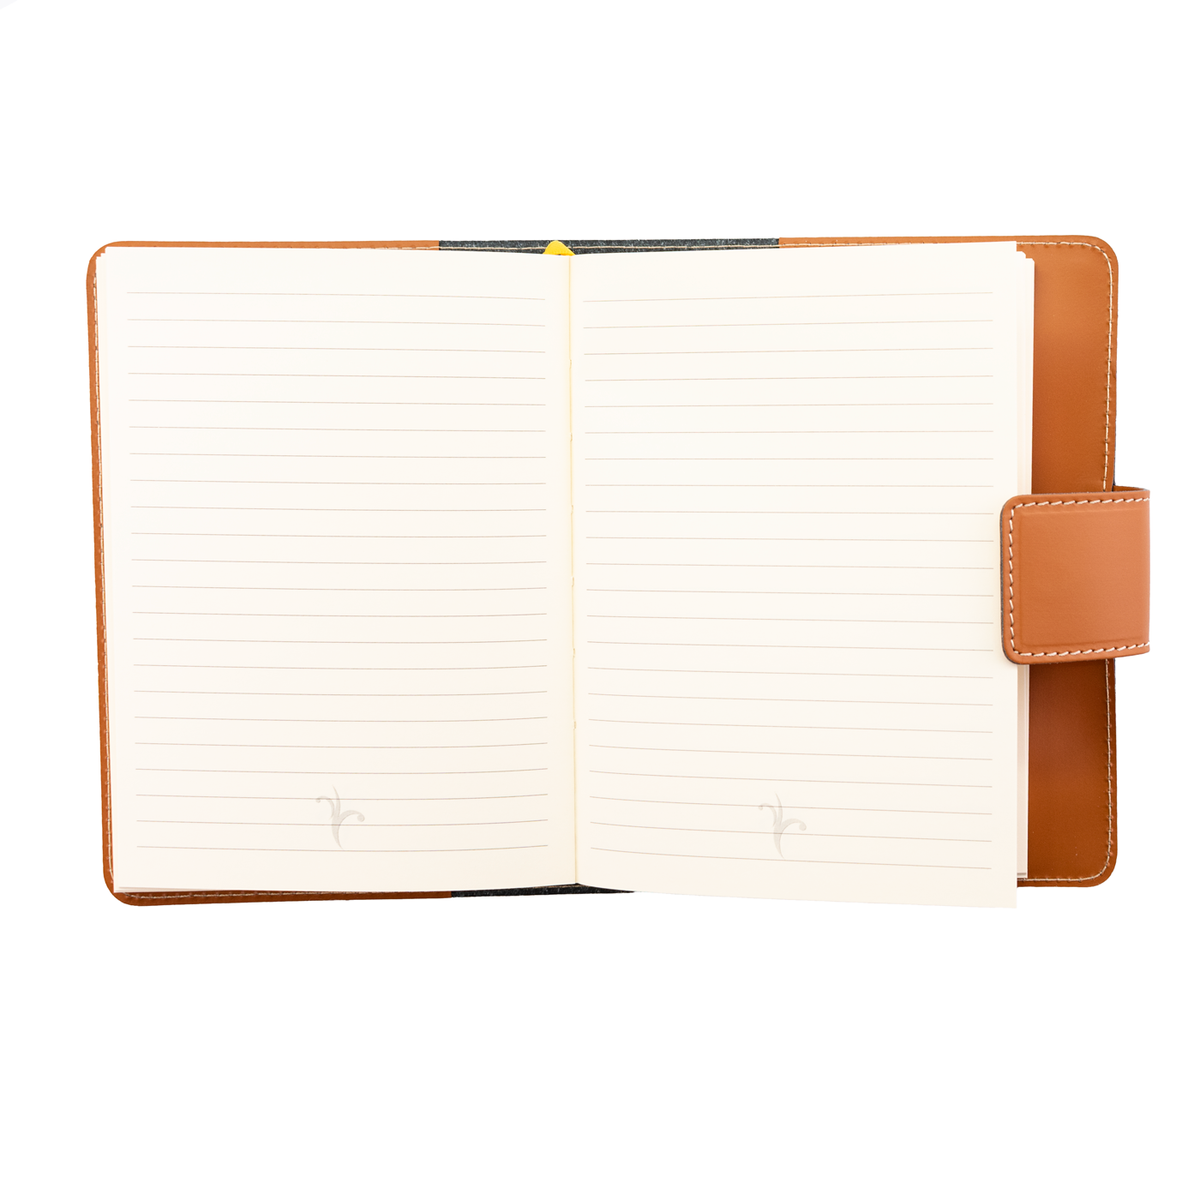 Fiorentina Leather refillable Journal w/ Snap Close- British Tan (5x7in)